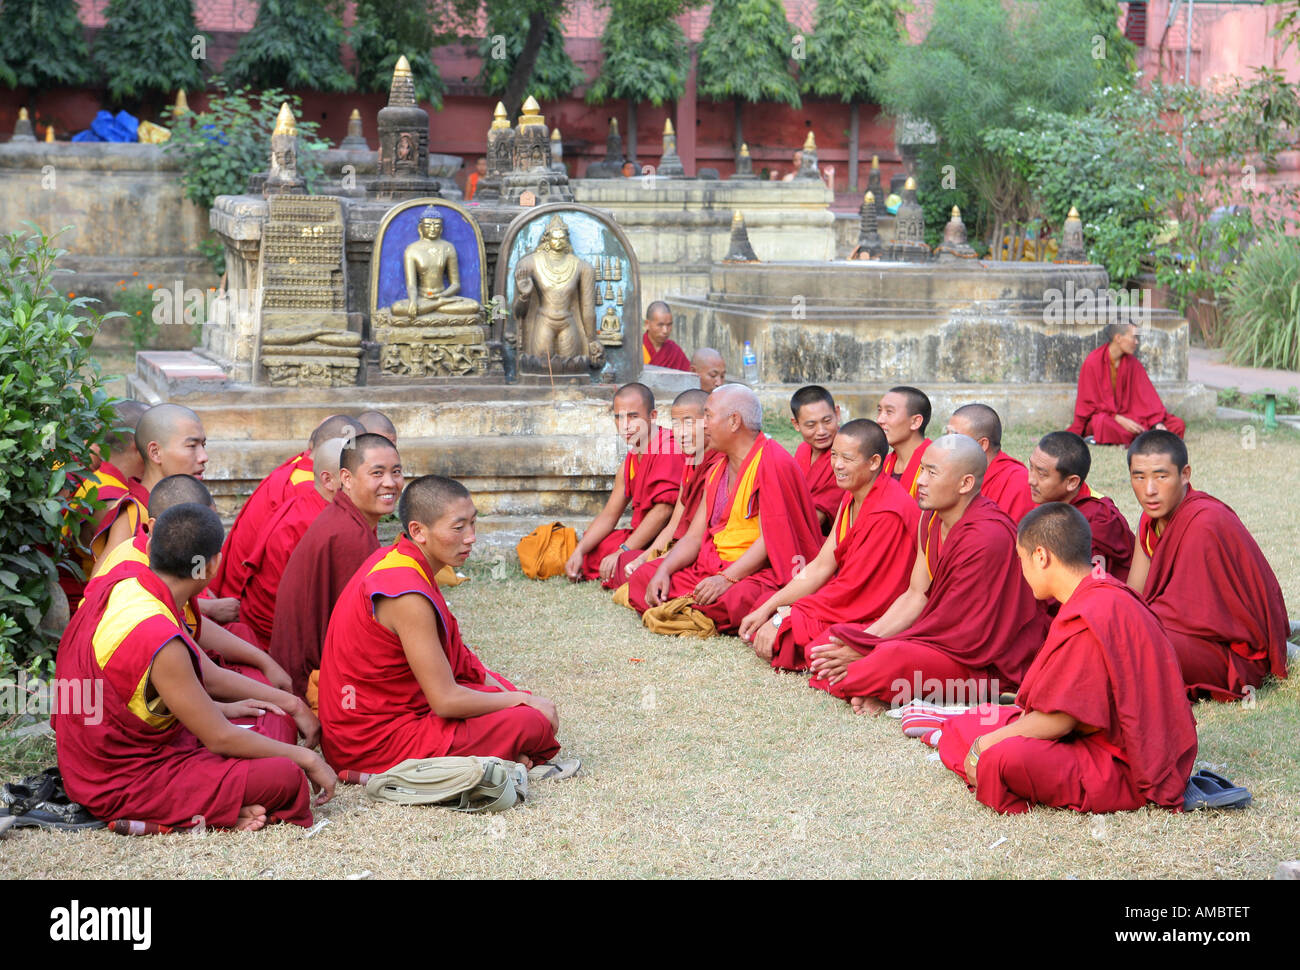 India, Bodhgaya: buddhist monks praying in the garden of Mahabodhi Temple, the place of the Buddha's Enlightenment Stock Photo